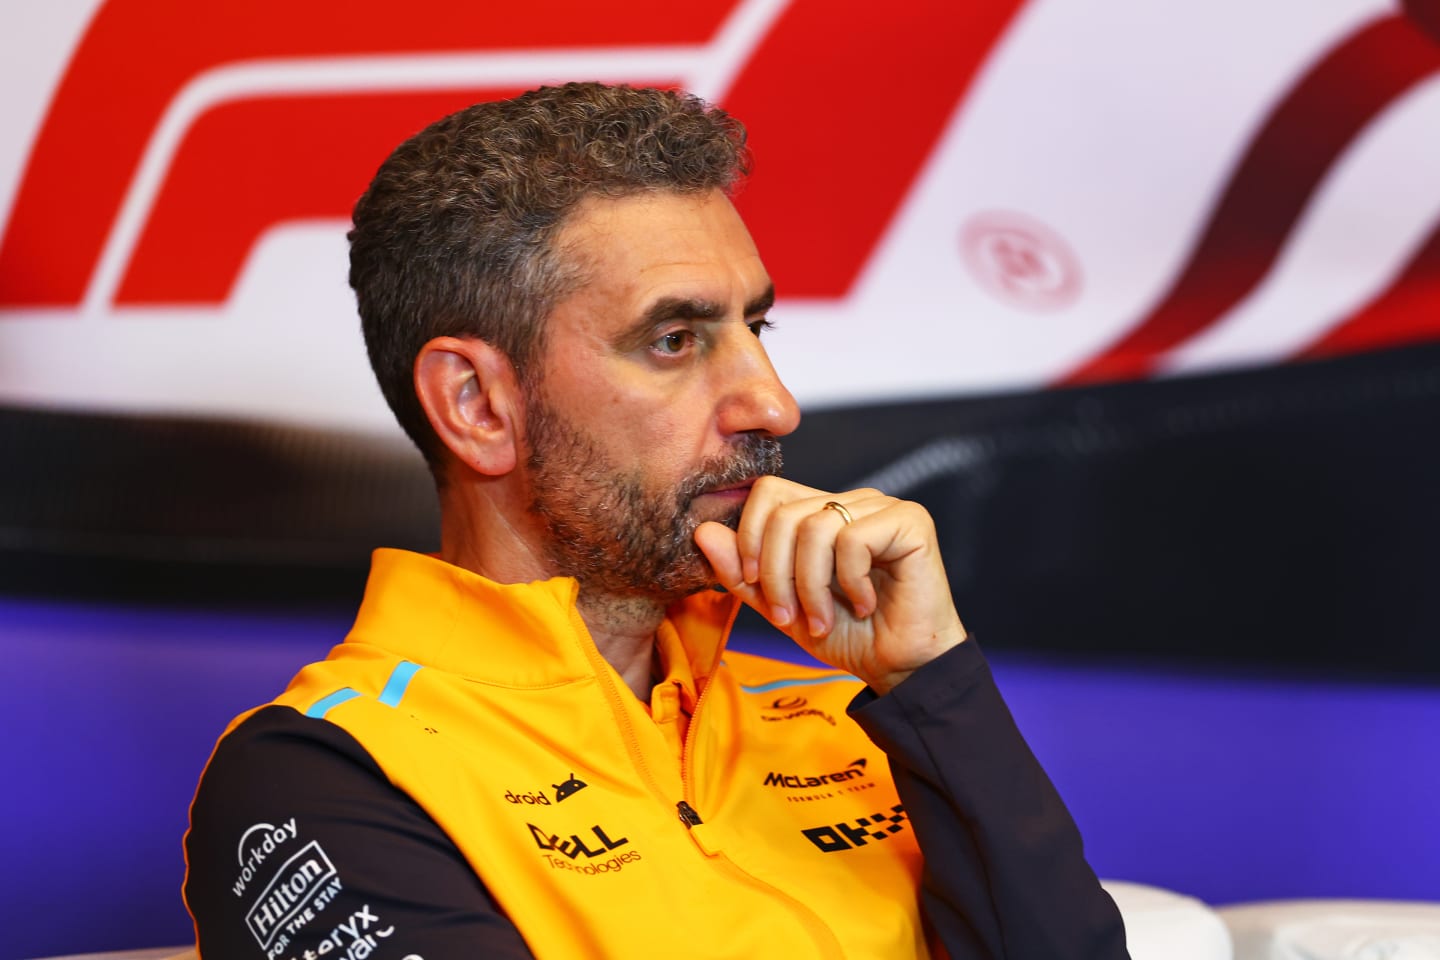 MONTREAL, QUEBEC - JUNE 07: McLaren Team Principal Andrea Stella attends the Team Principals Press Conference during practice ahead of the F1 Grand Prix of Canada at Circuit Gilles Villeneuve on June 07, 2024 in Montreal, Quebec. (Photo by Bryn Lennon/Getty Images)